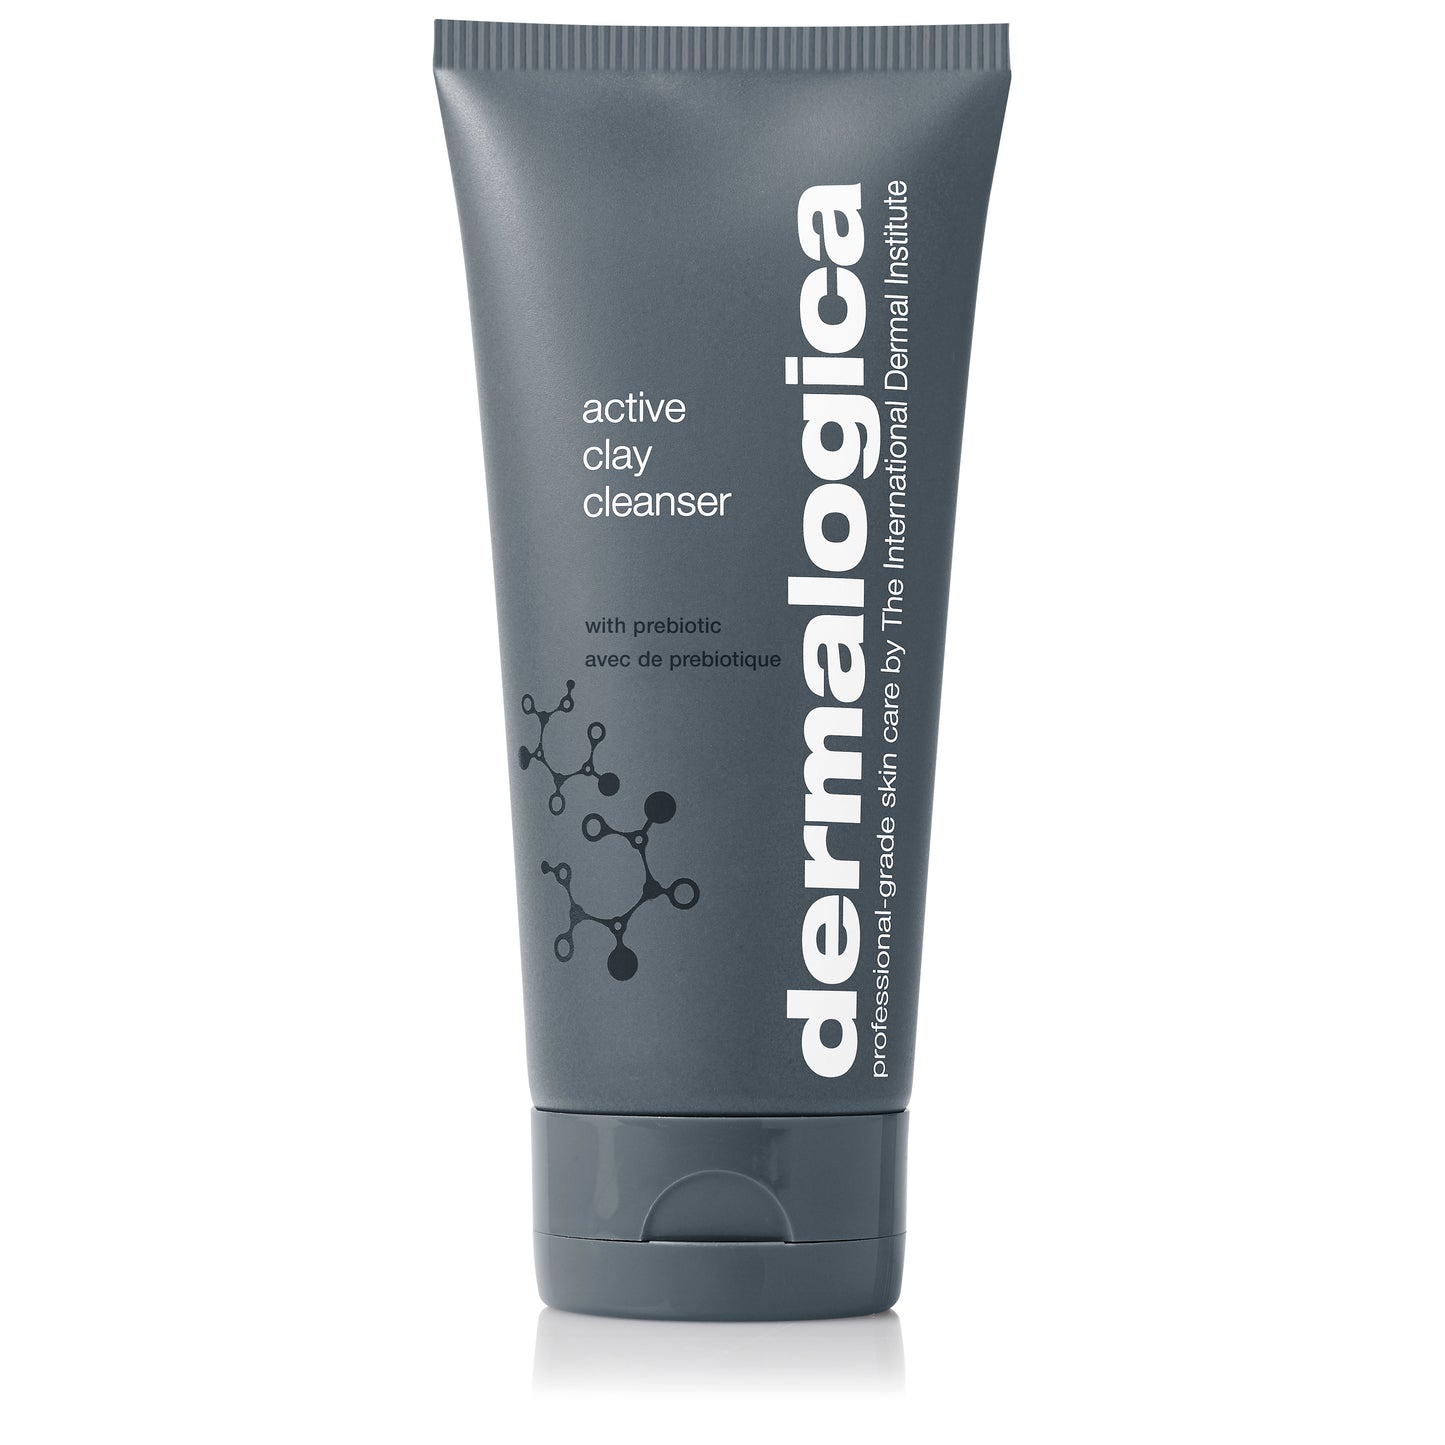 Active clay cleanser grey product bottle.